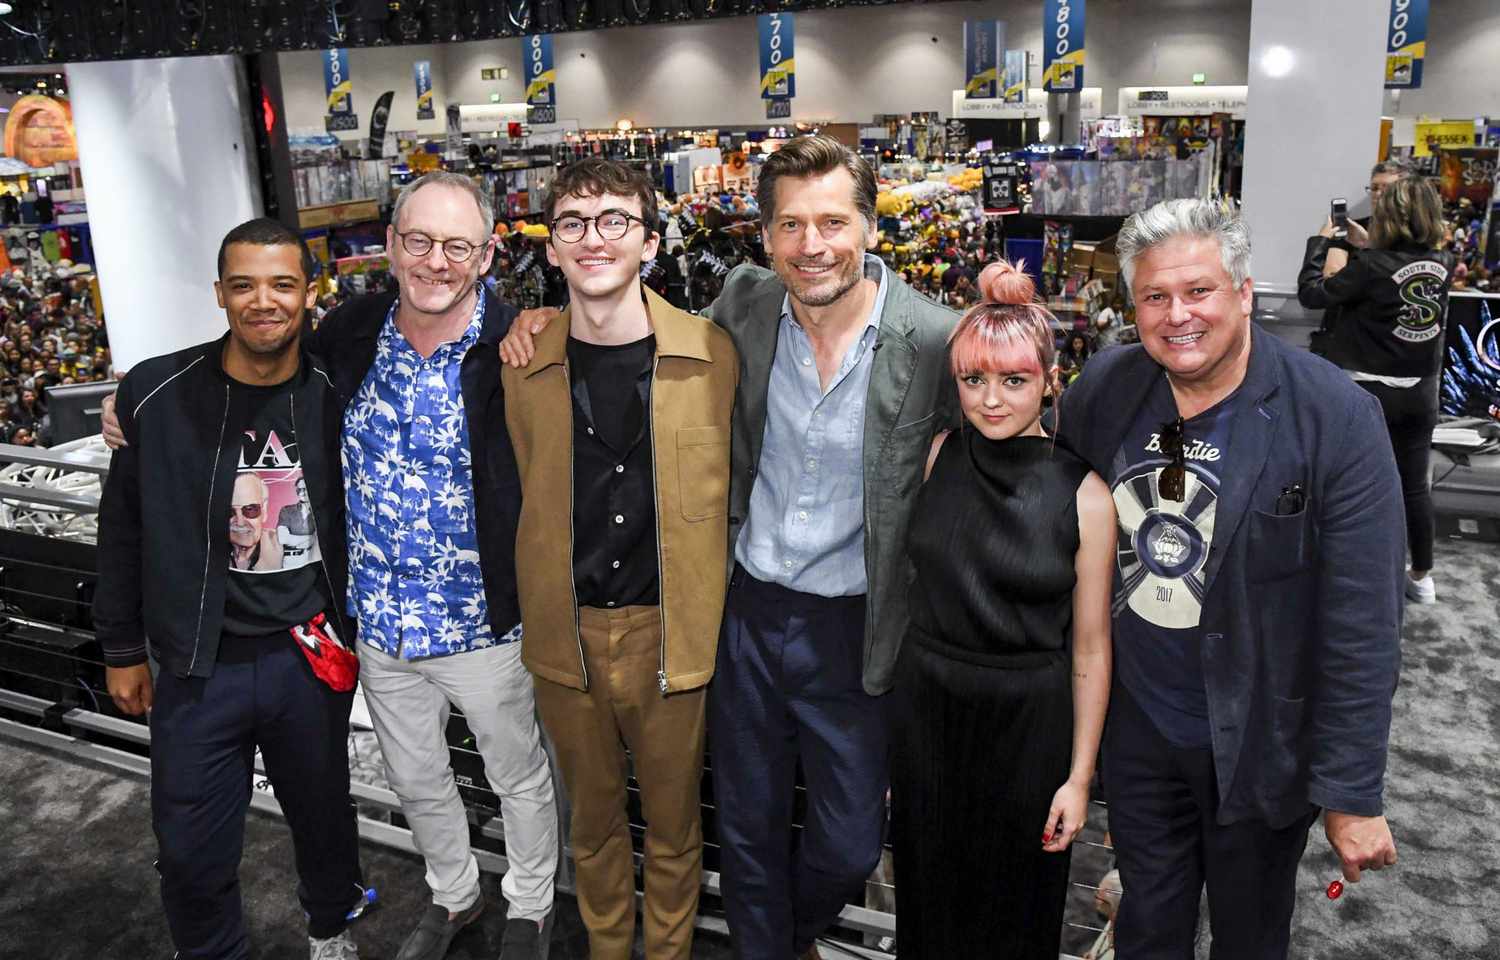 SAN DIEGO, CALIFORNIA - JULY 19: (L-R) Jacob Anderson, Liam Cunningham, Isaac Hempstead, Nikolaj Coster-Waldau, Maisie Williams, and Conleth Hill at &ldquo;Game Of Thrones&rdquo; Comic Con Autograph Signing 2019 on July 19, 2019 in San Diego, California. (Photo by Jeff Kravitz/FilmMagic for HBO)